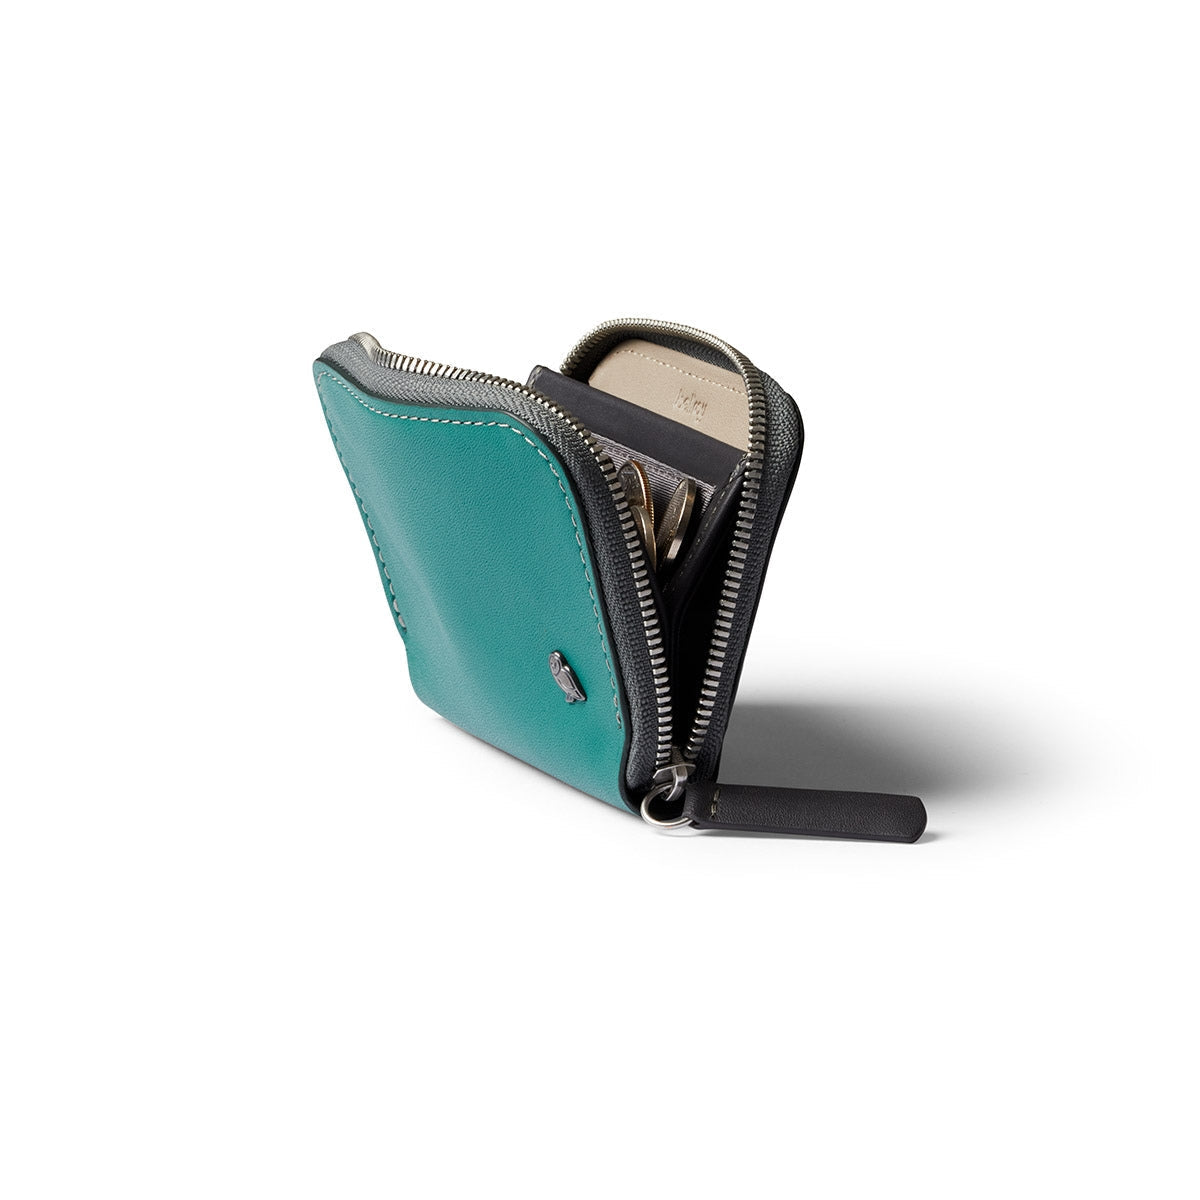 Bellroy Folio Mini – (Wallet, Coin Pouch) - Teal